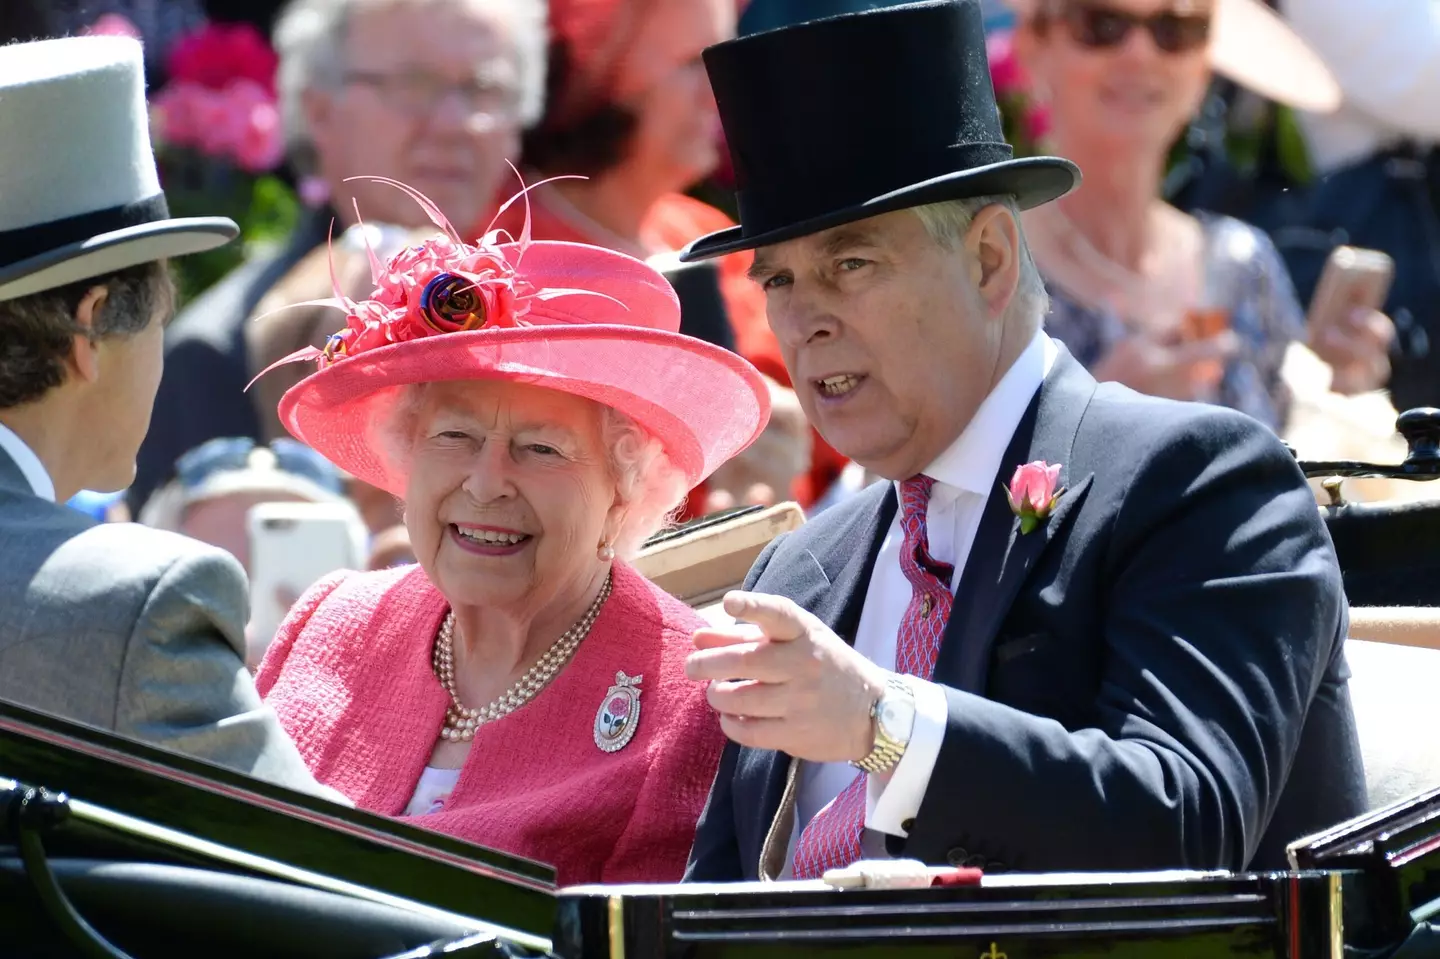 The Duke of York and The Queen at Royal Ascot in 2018.